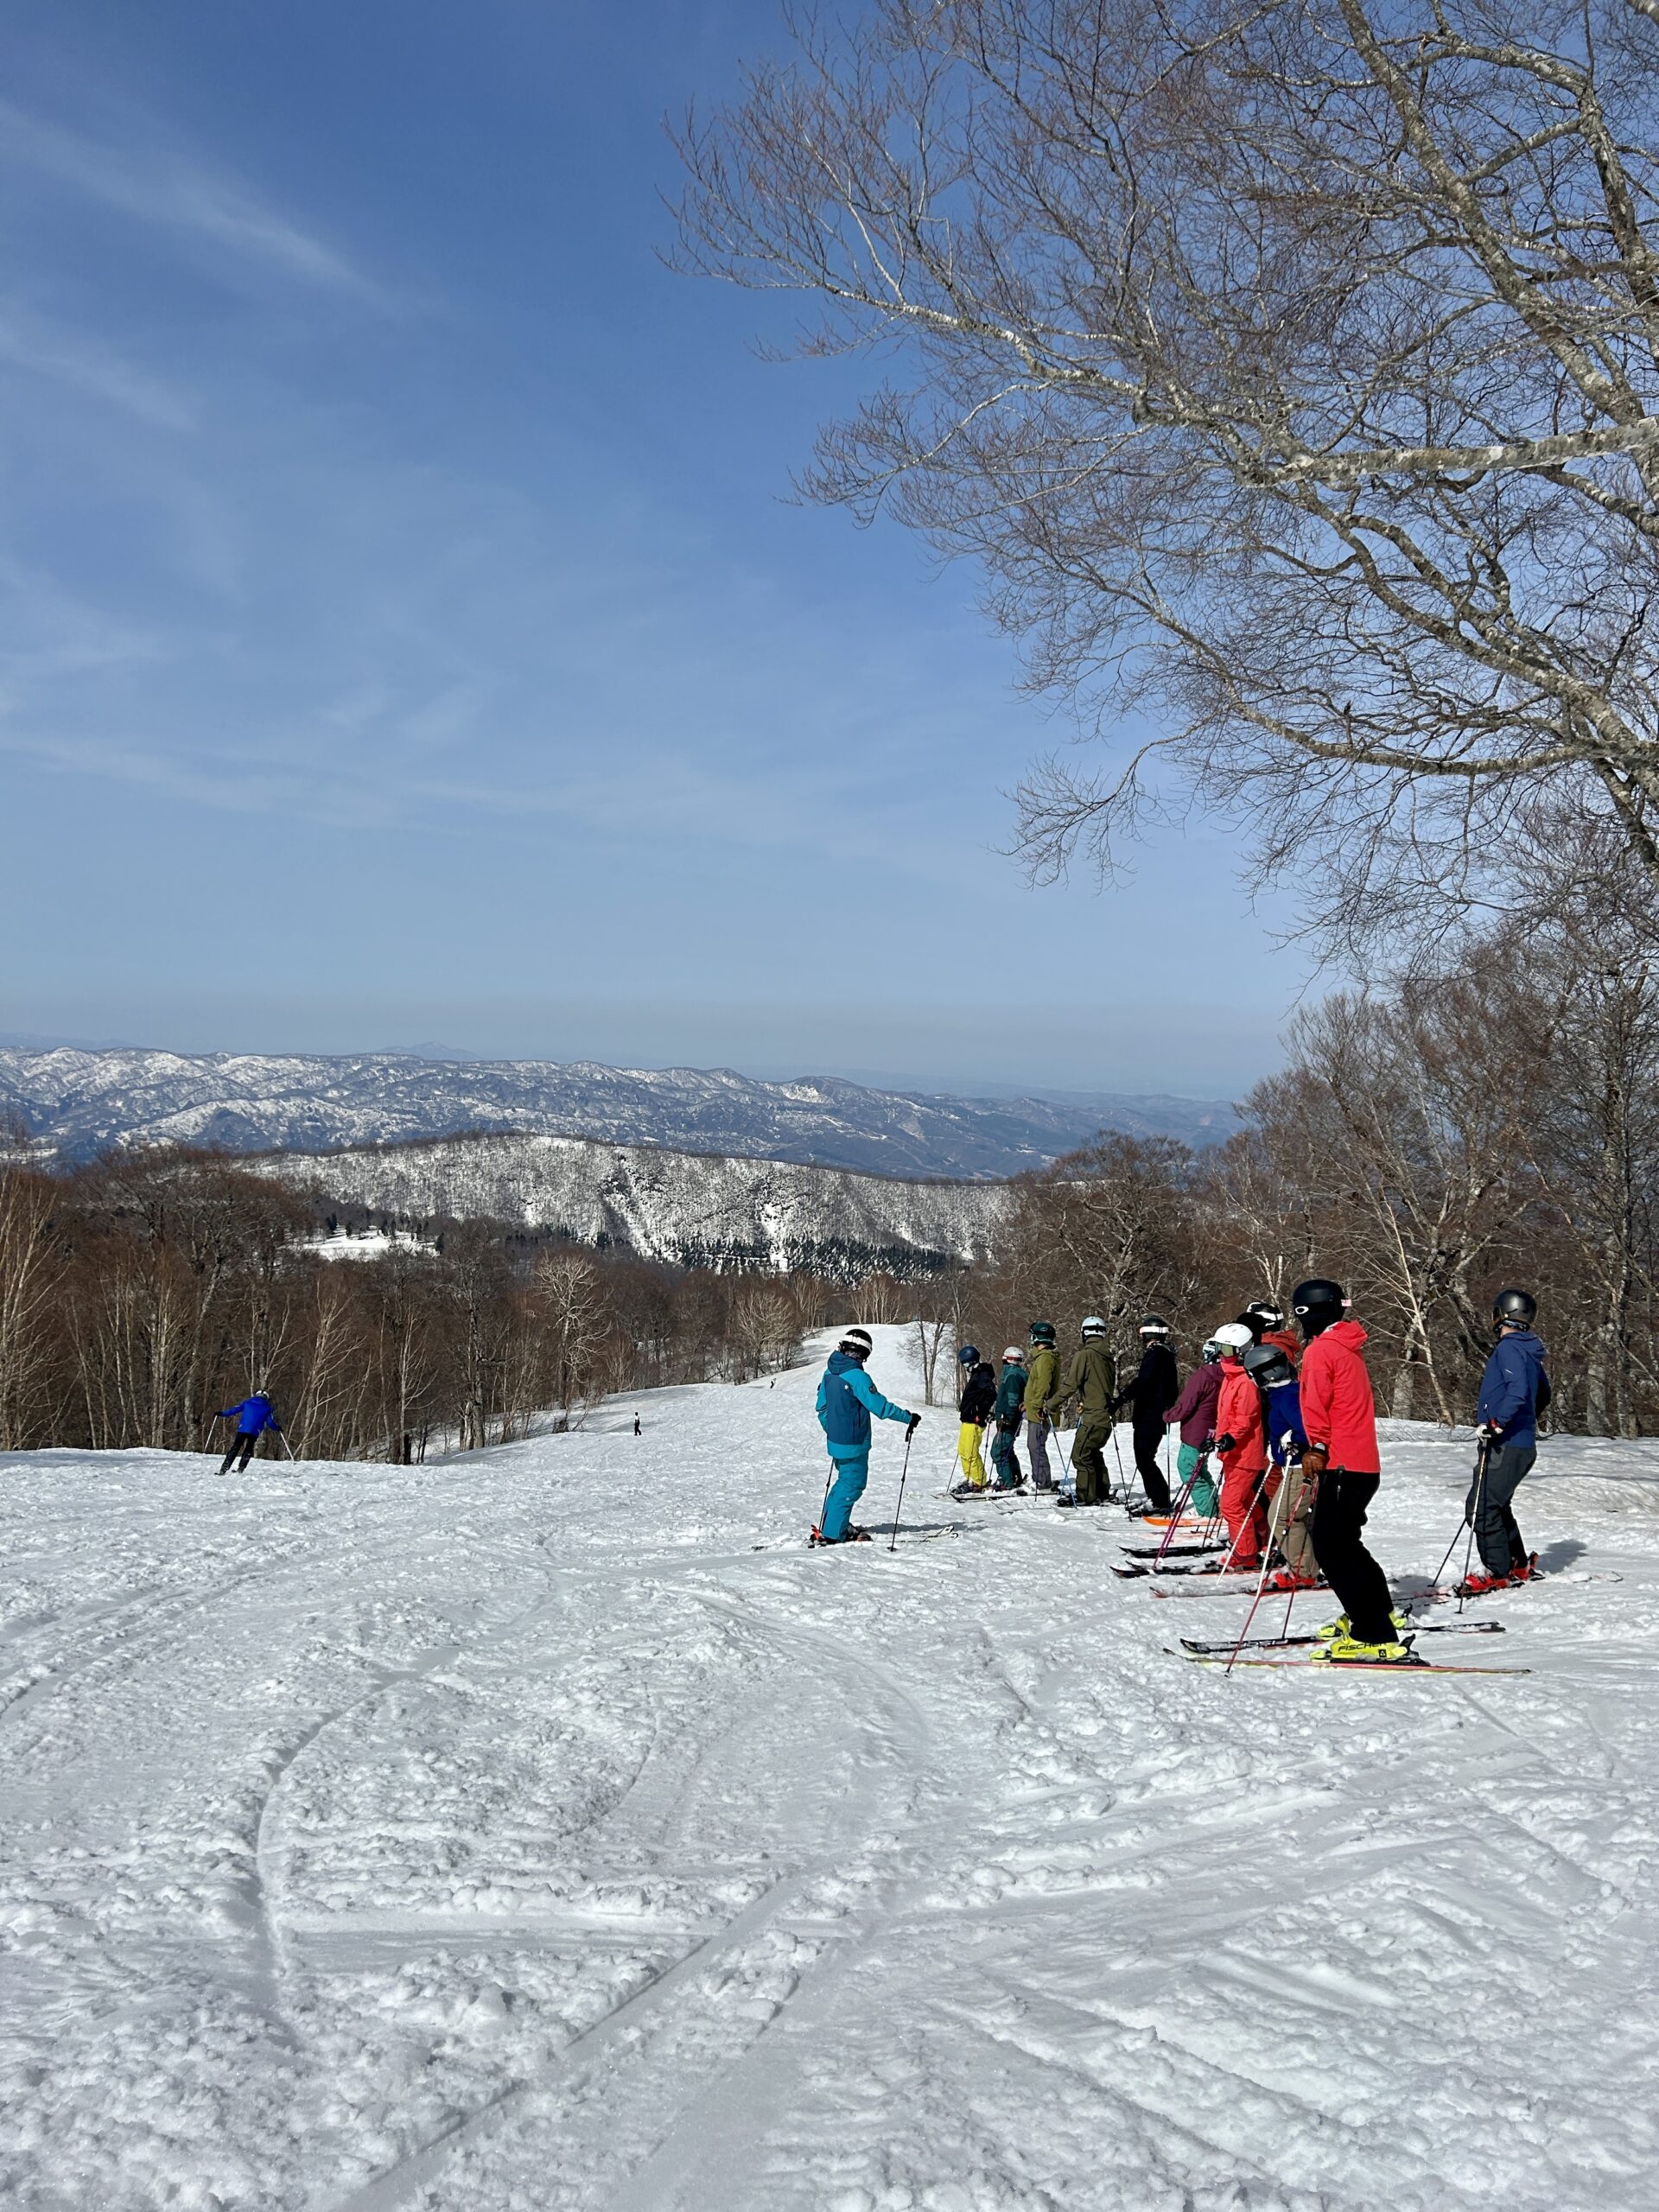 Enjoy the views from the top of the mountain in Nozawa Onsen on a sunny day